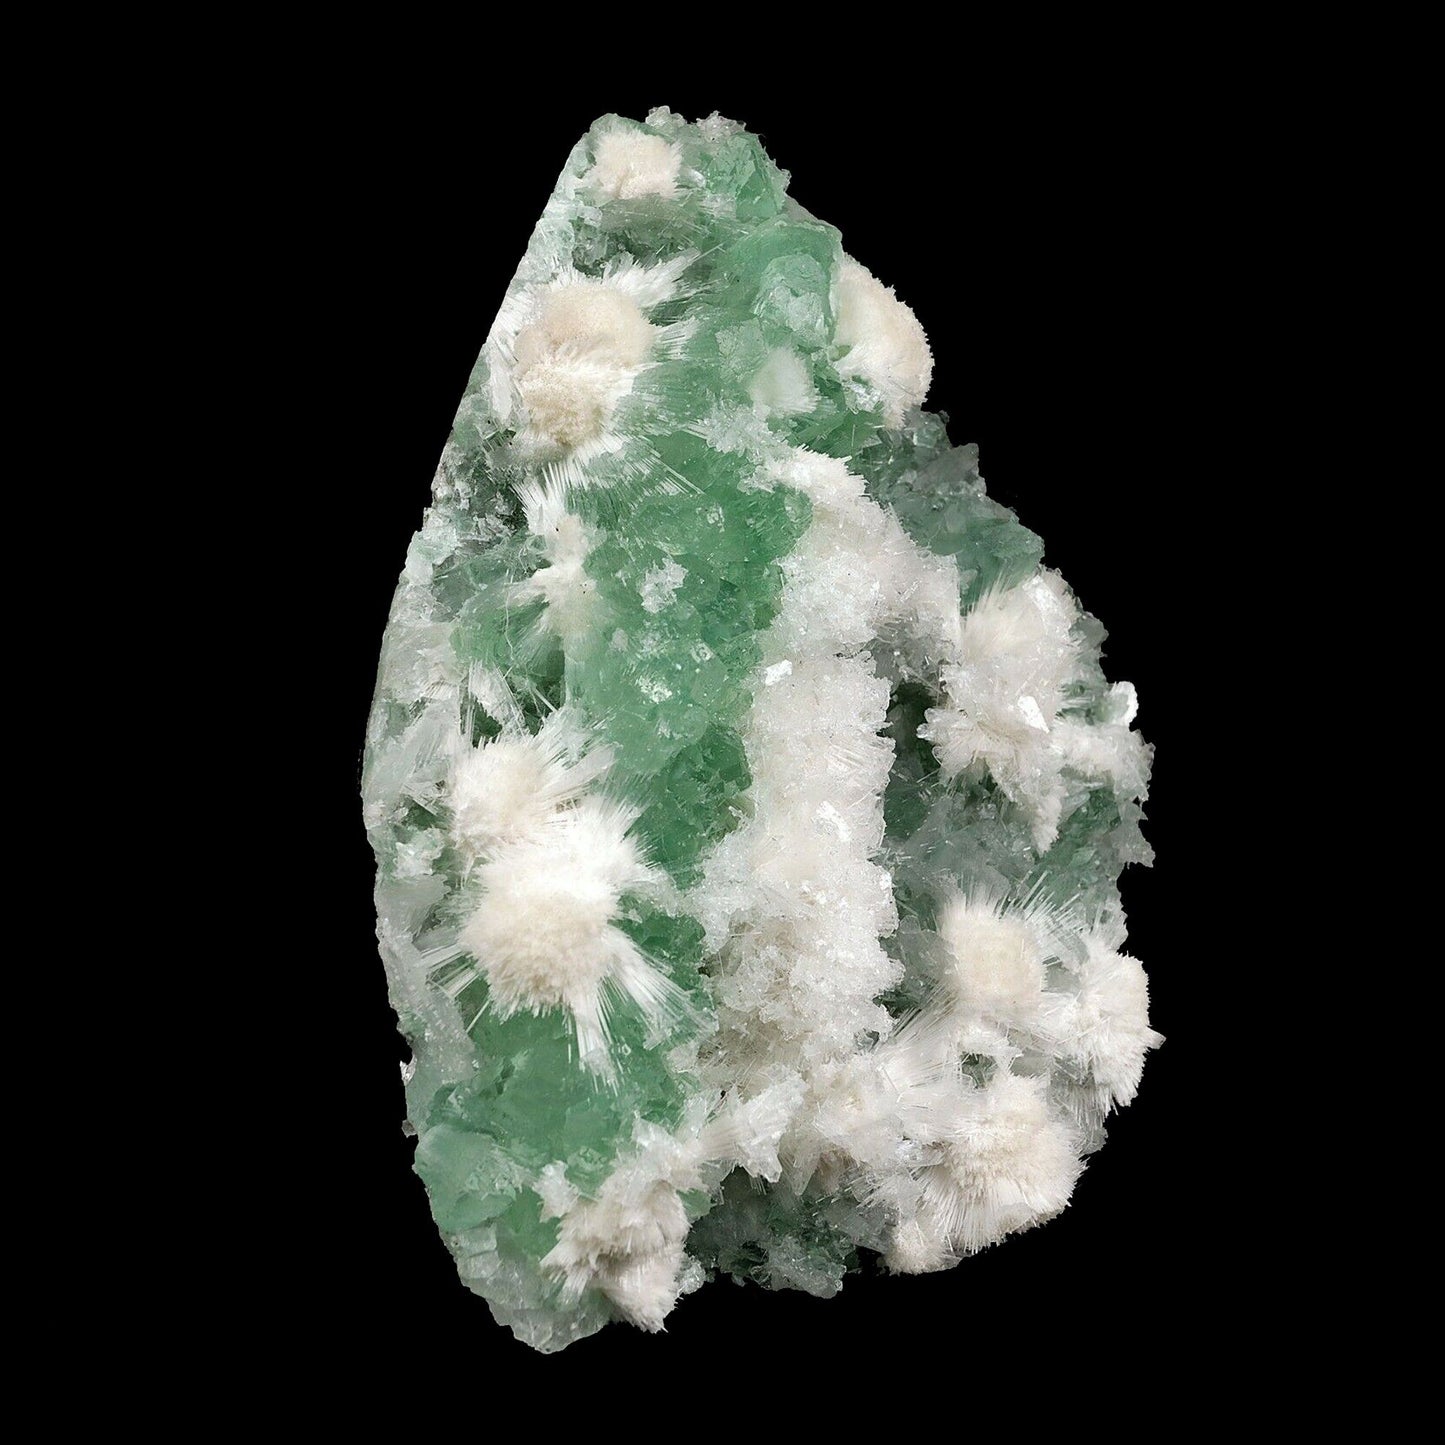 Apophyllite green with Scolecite on Chalcedony A Real Attention Grabbe…  https://www.superbminerals.us/products/apophyllite-green-with-scolecite-on-chalcedony-natural-mineral-specimen-b-3741  Features:This is worthy of center piece status in any mineral collection. Its first feature is size - a whopping 20 by 14 cm and 1.560 kg which qualifies it for that rare super extra large status which Mineralium specializes in. The next feature is sculptural snowy white needle-like scolecite which forms radiating ros